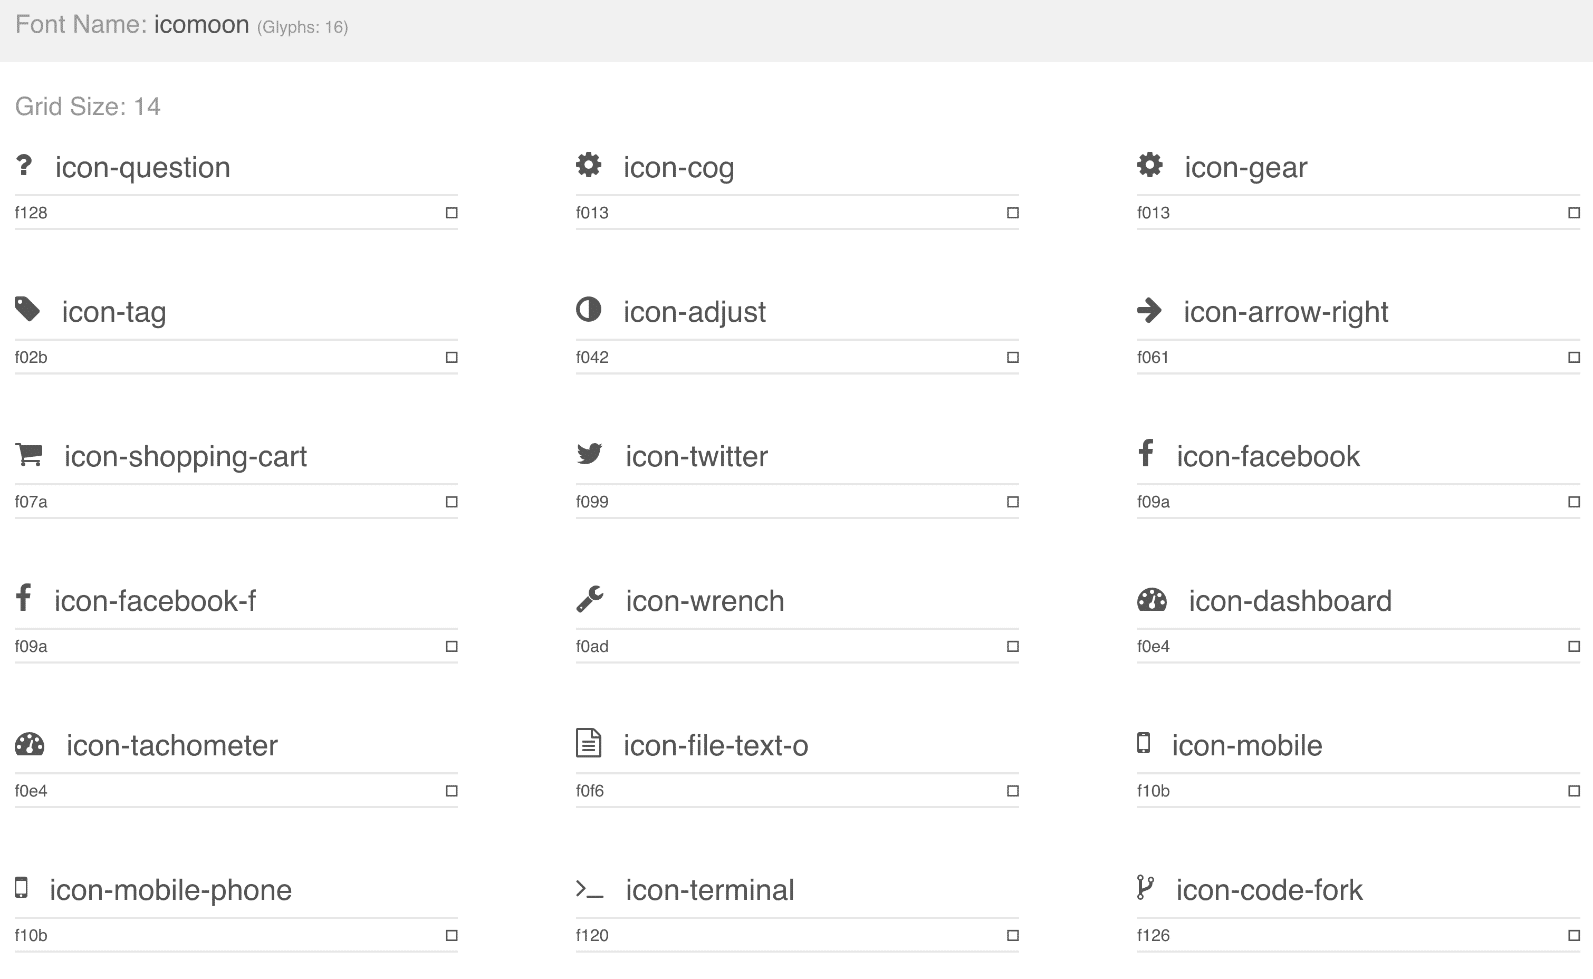 Font Awesome Icons von dem IcoMoon export